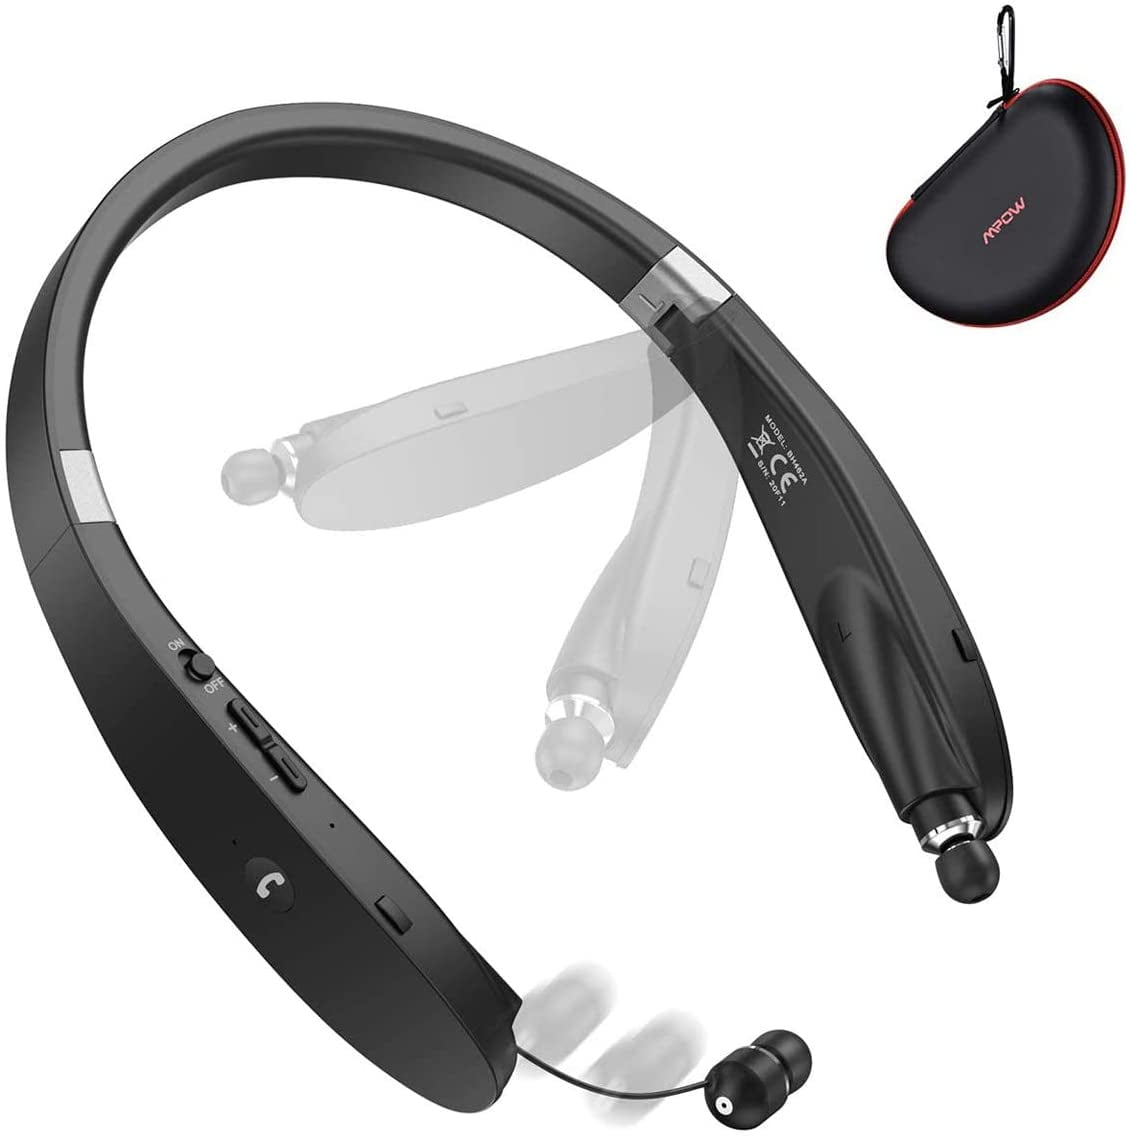 Mpow Jaws V4.1 Bluetooth Headphones Wireless Neckband Headset Stereo Noise Cancelling Earbuds w/ Mic-Black MPOWA MBH25